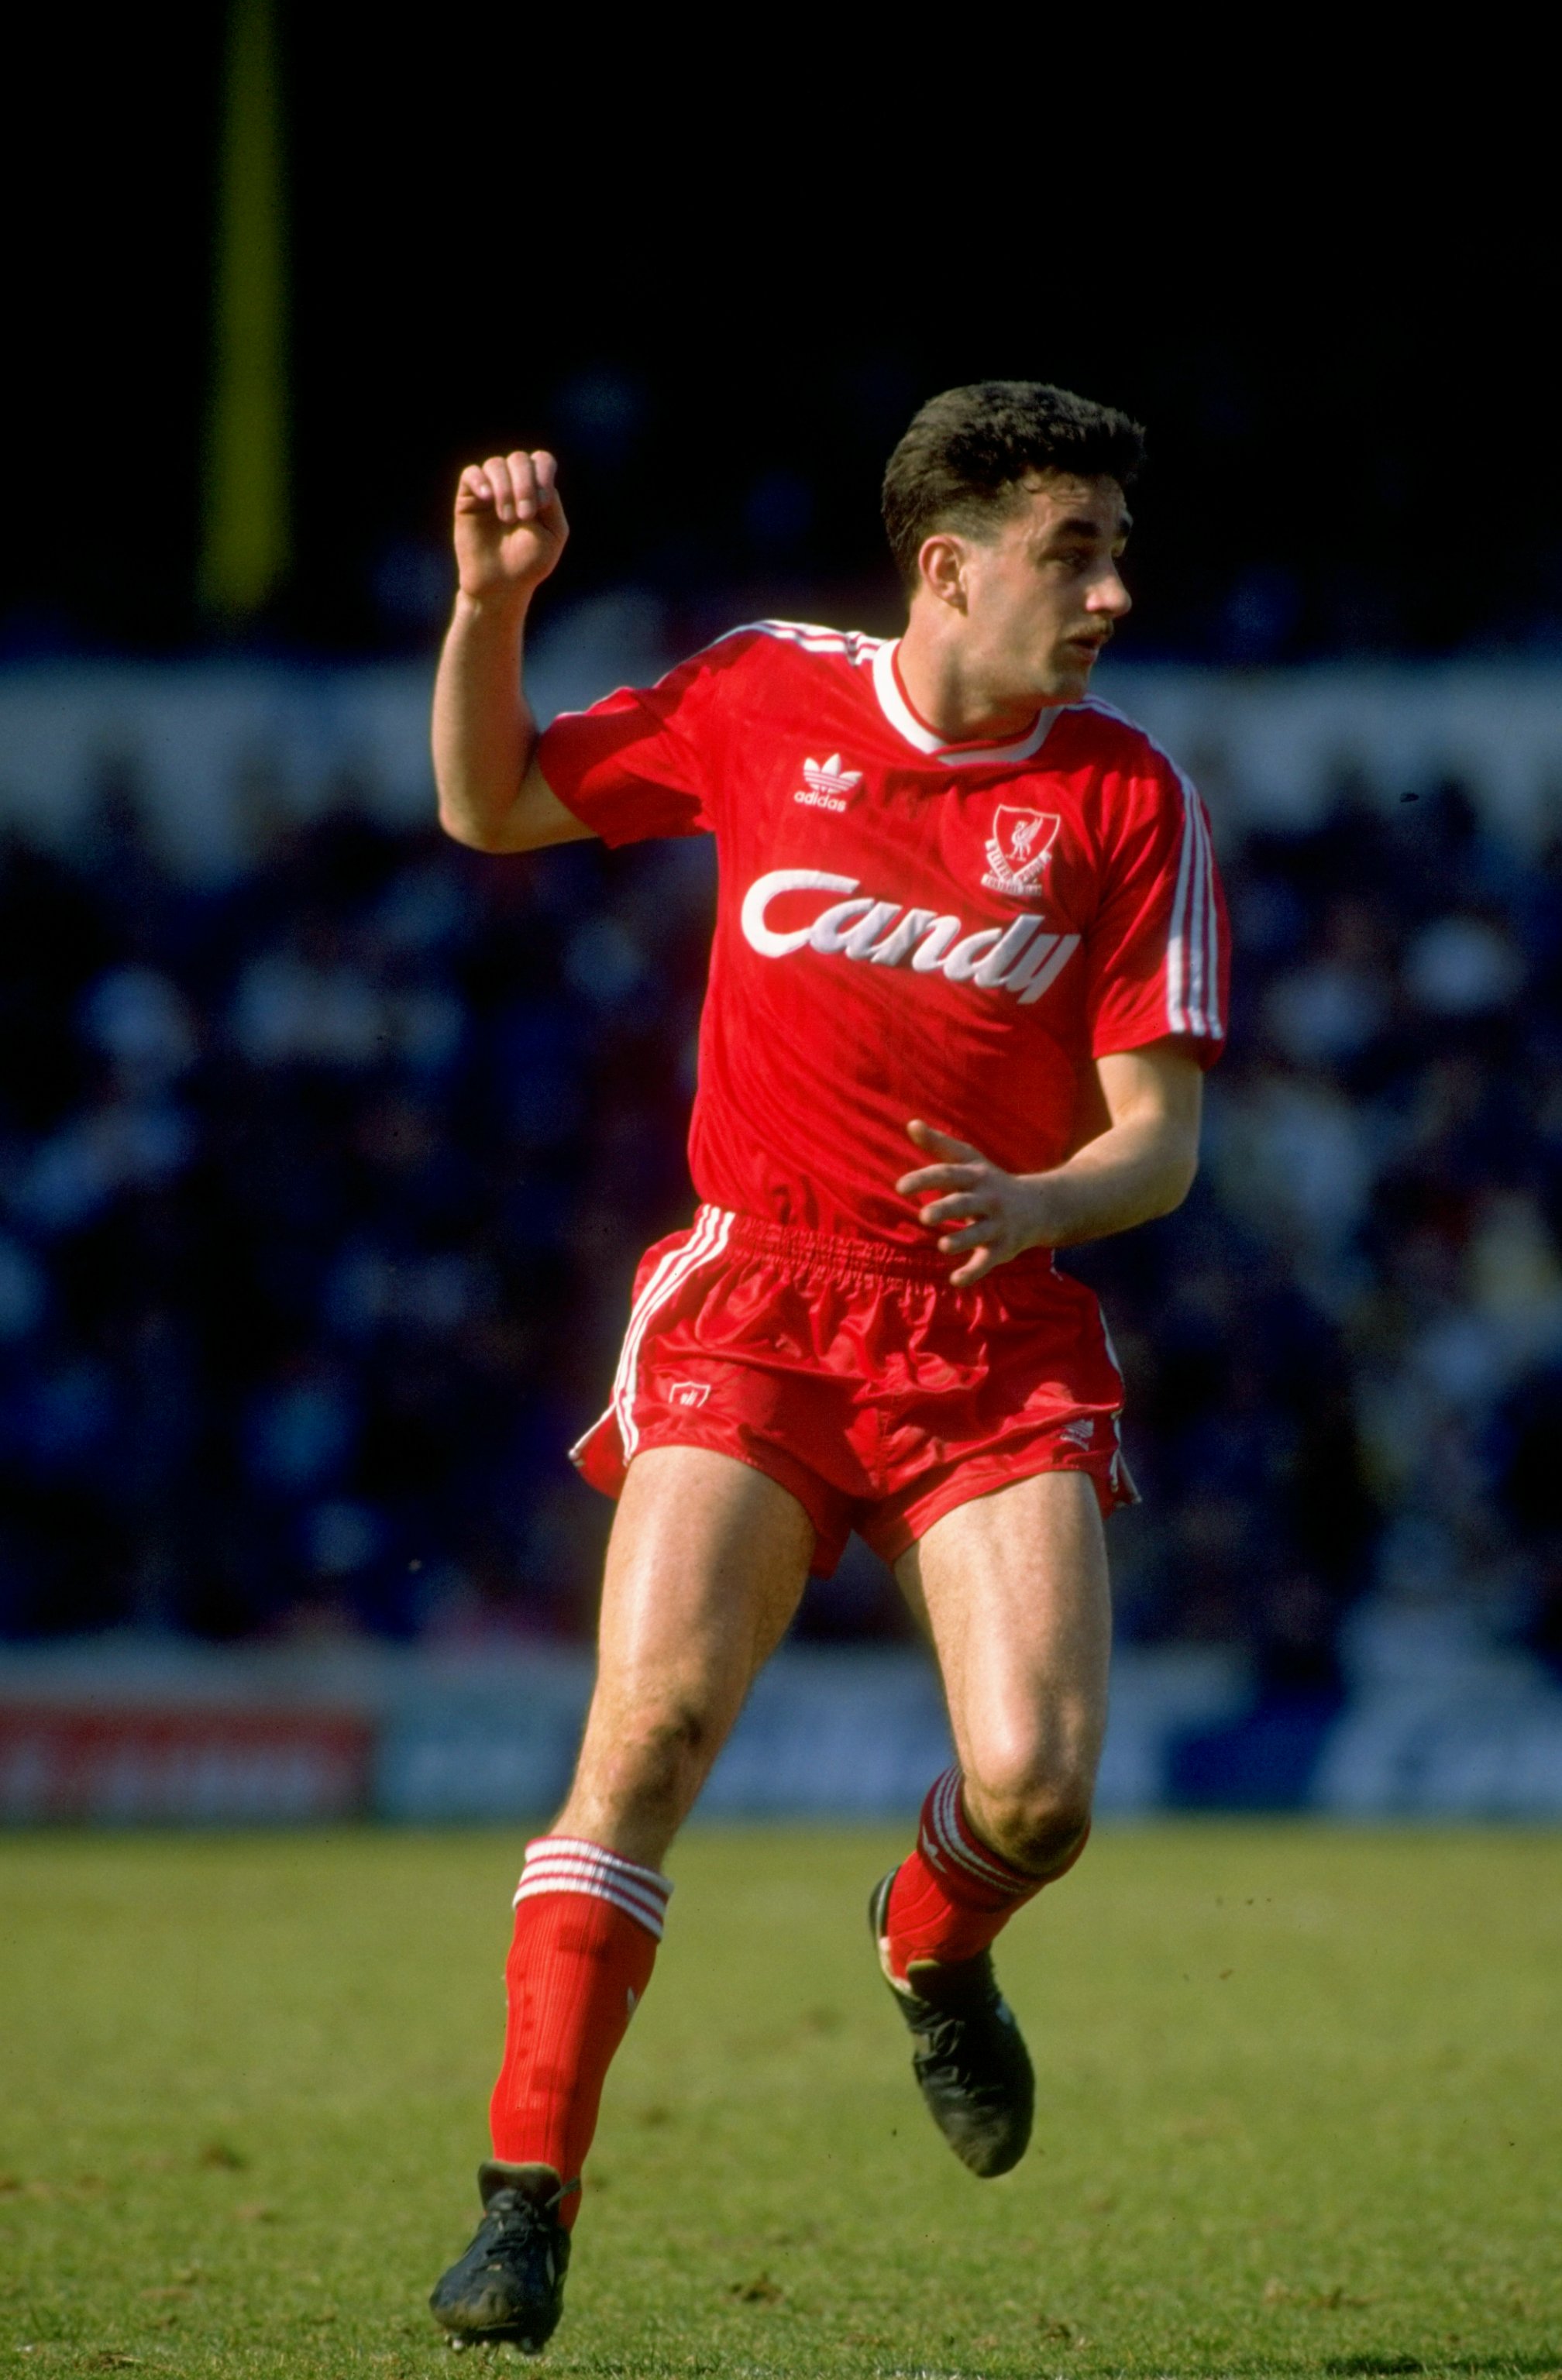 1989:  John Aldridge of Liverpool in action during a Barclays Division One match played at Anfield in Liverpool, England. \ Mandatory Credit: Allsport UK /Allsport